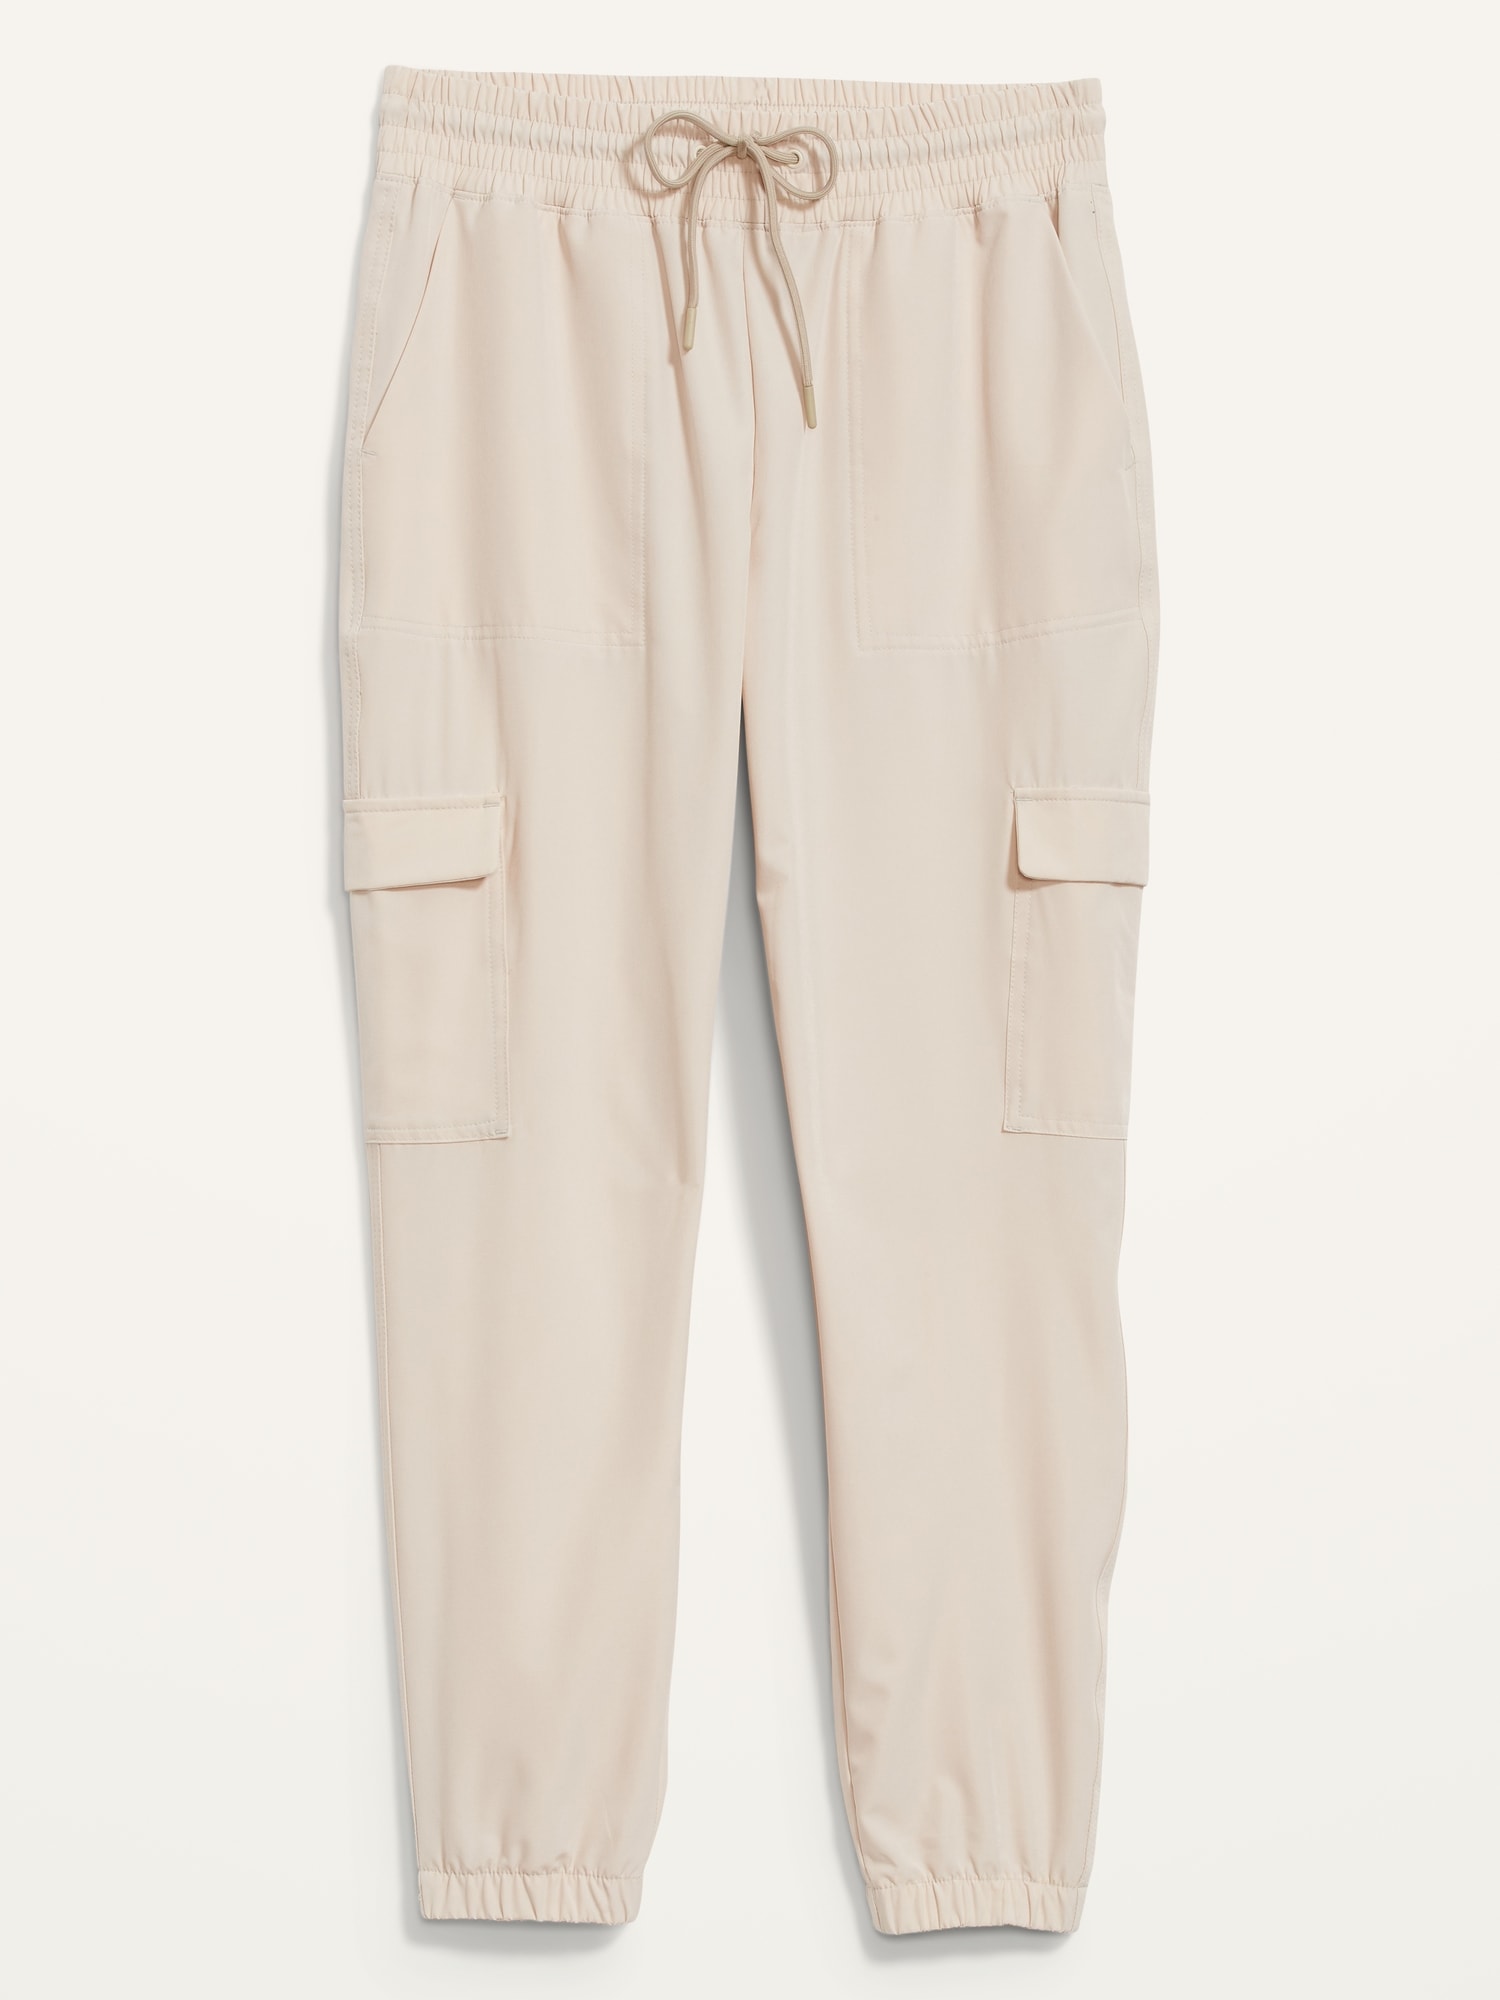 Womens Joggers  Old Navy